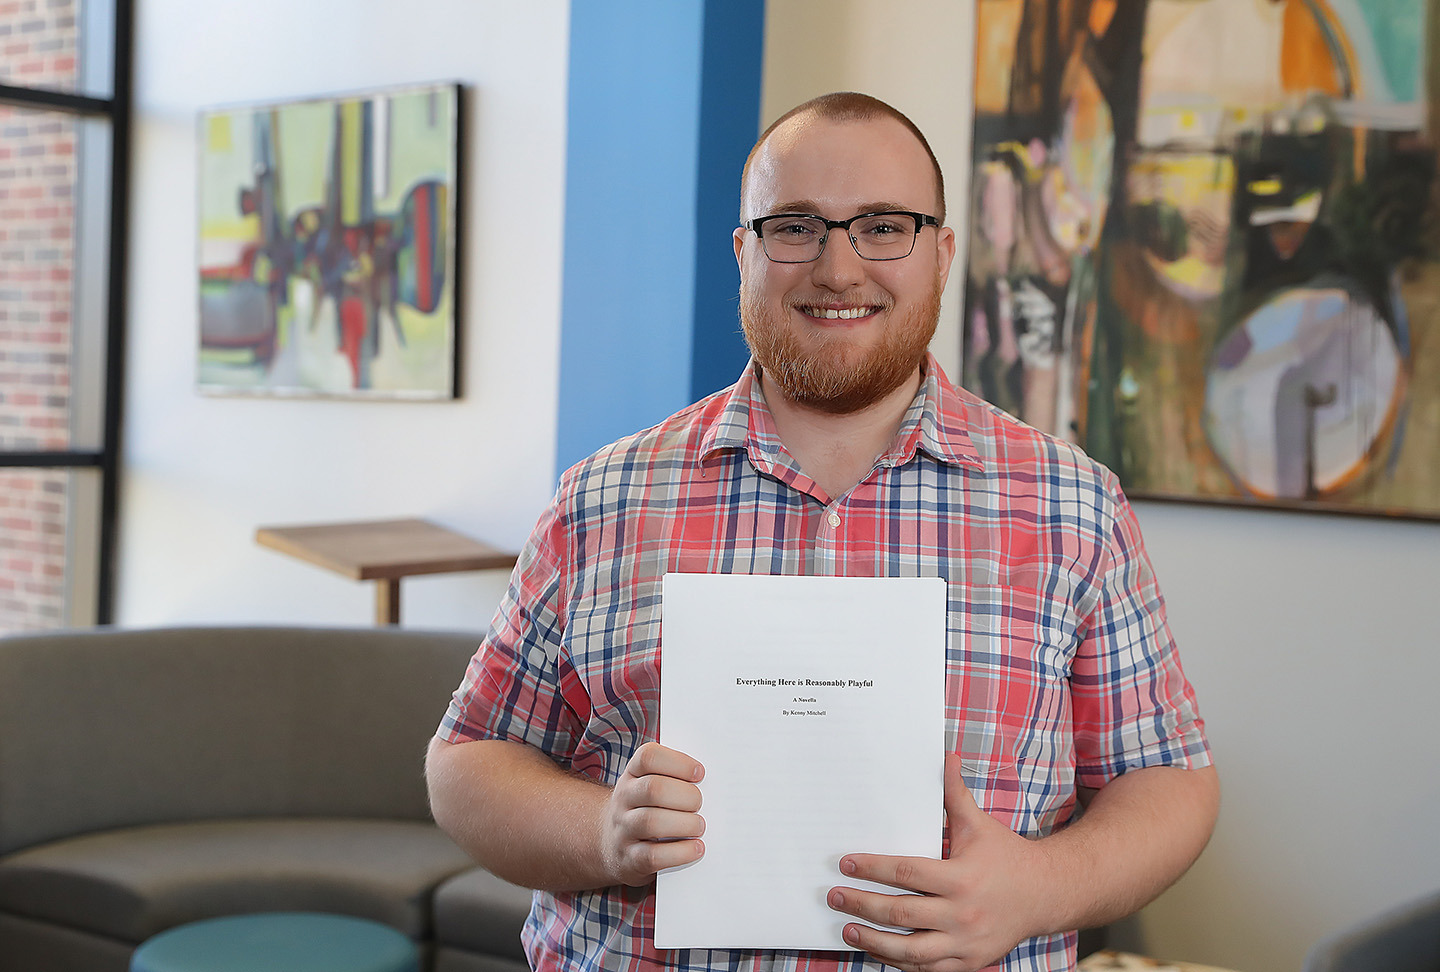 UNK junior Kenny Mitchell has written four flash fiction stories that were accepted for publication in online journals and literary magazines and he’s currently working on a novella. (Photos by Erika Pritchard, UNK Communications)